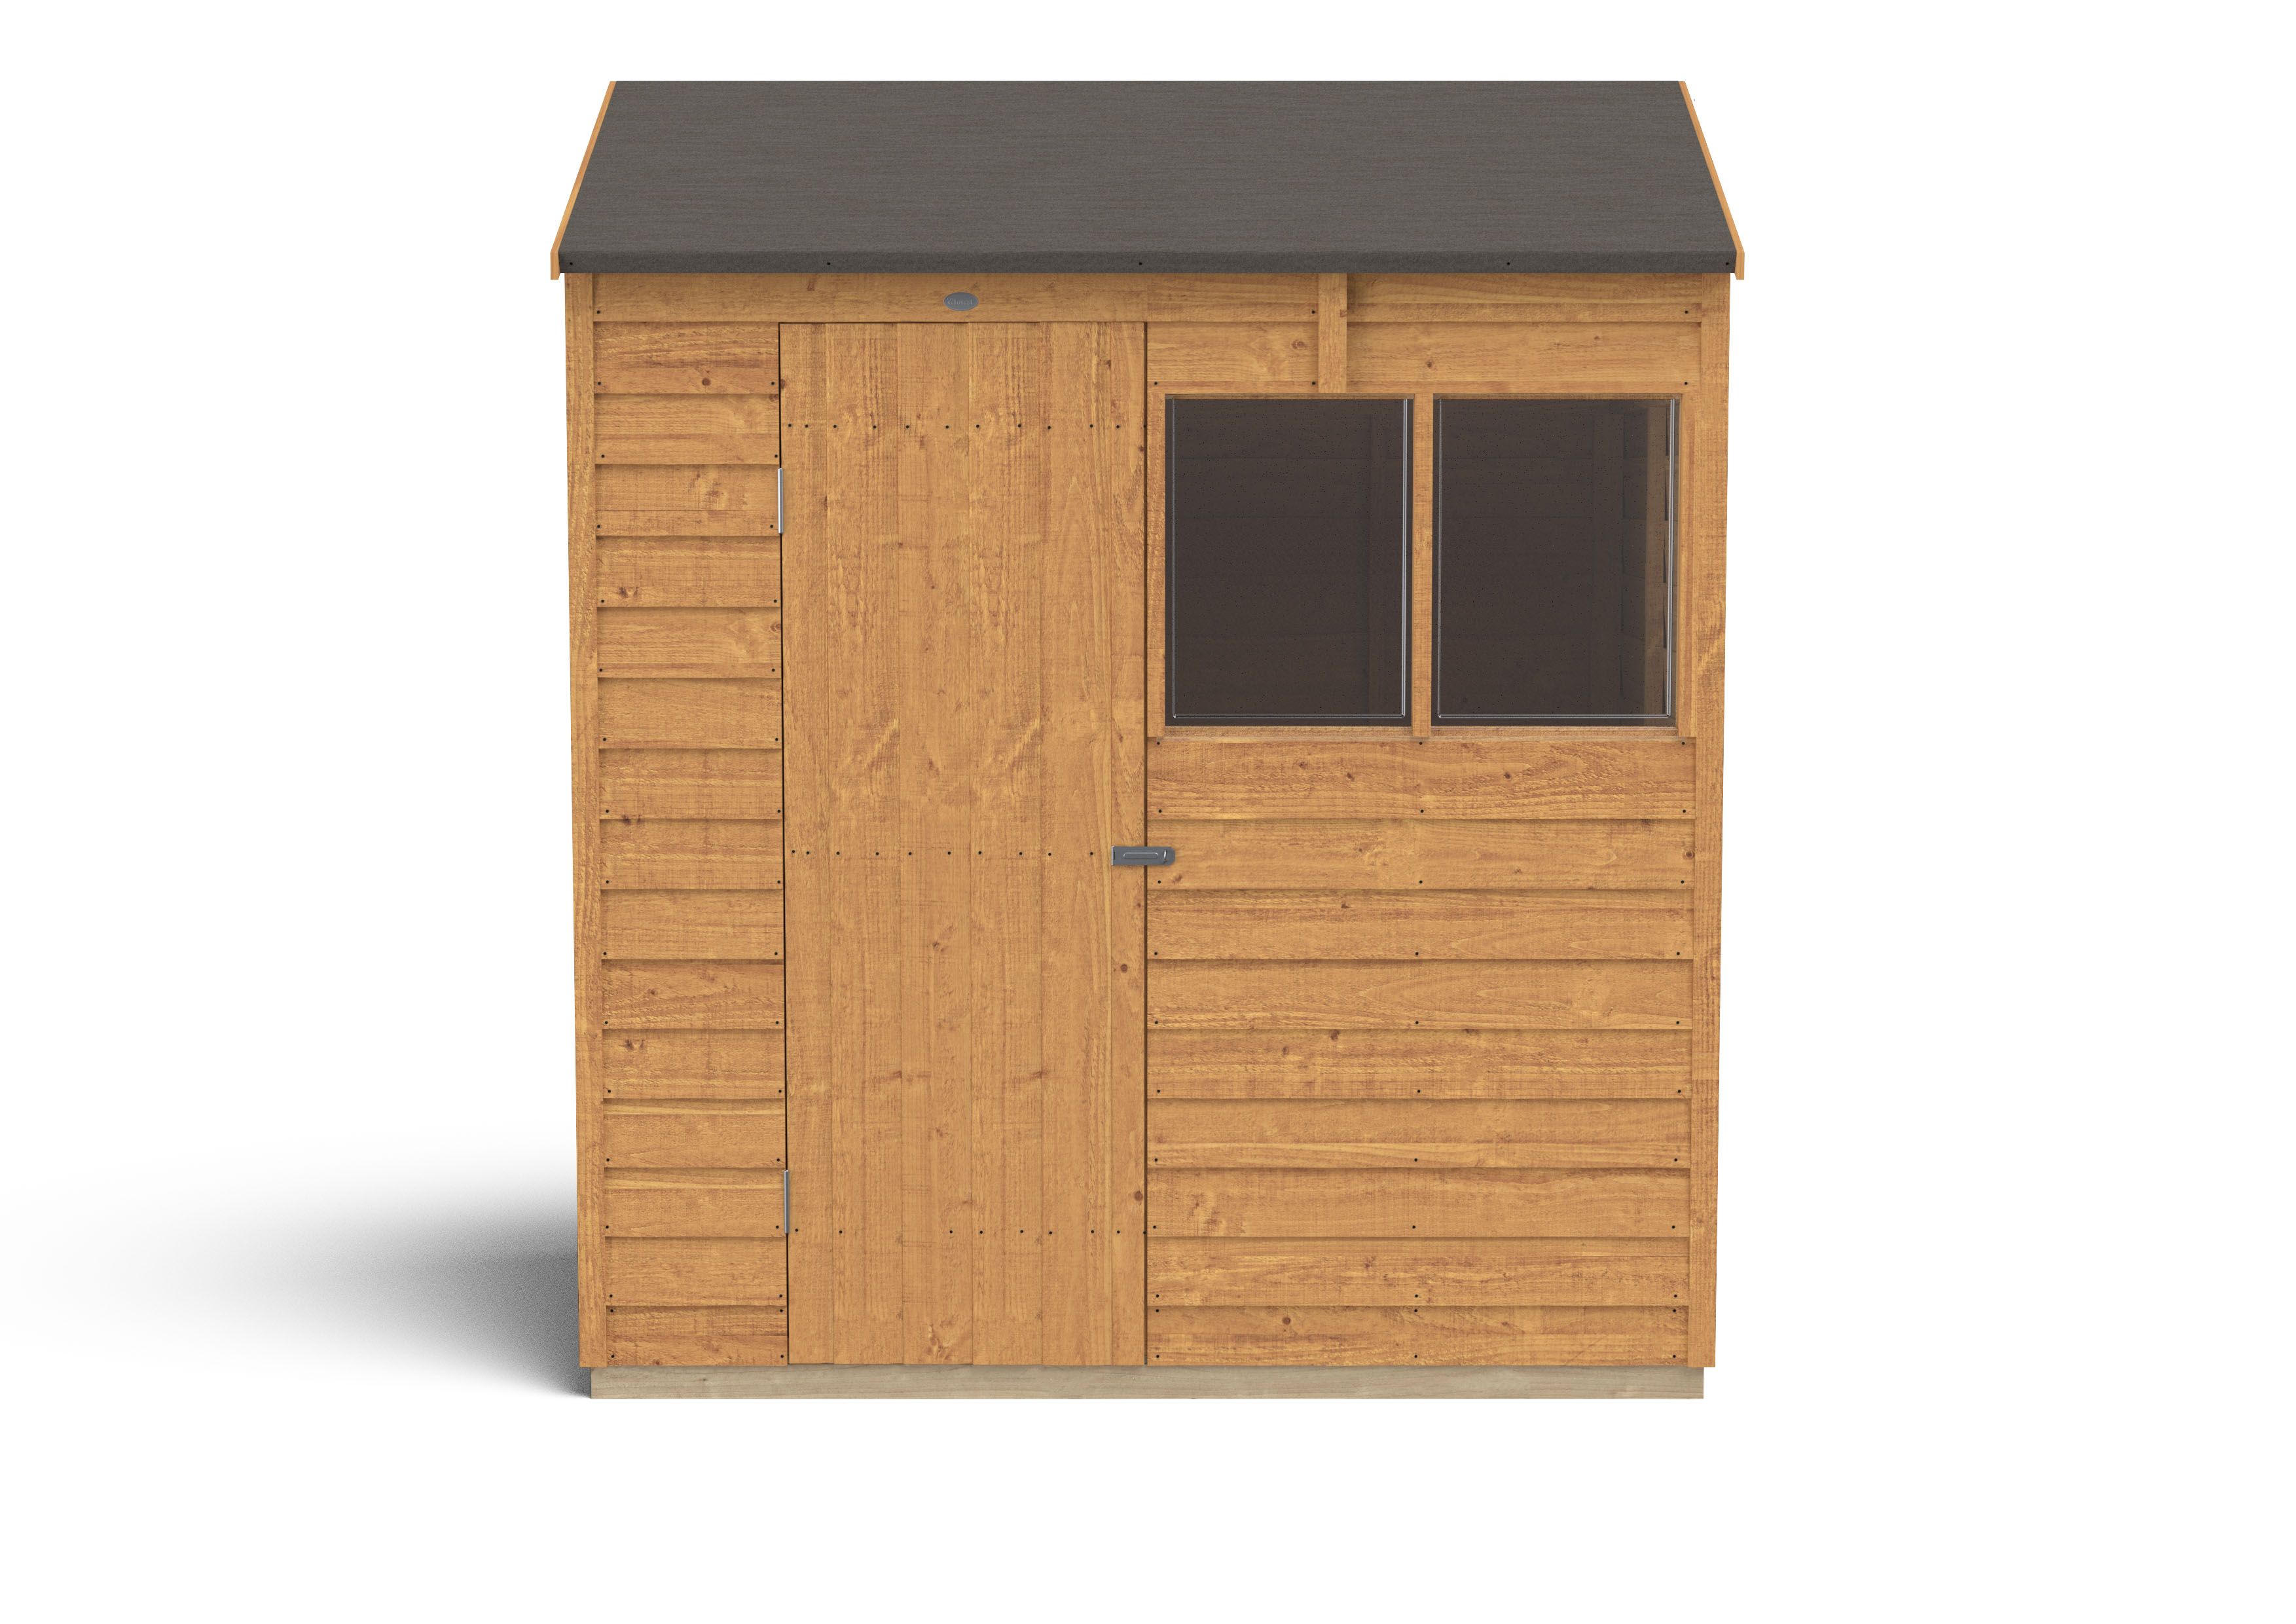 Forest Garden Overlap 6x4 ft Reverse apex Wooden Dip treated Shed with floor & 2 windows